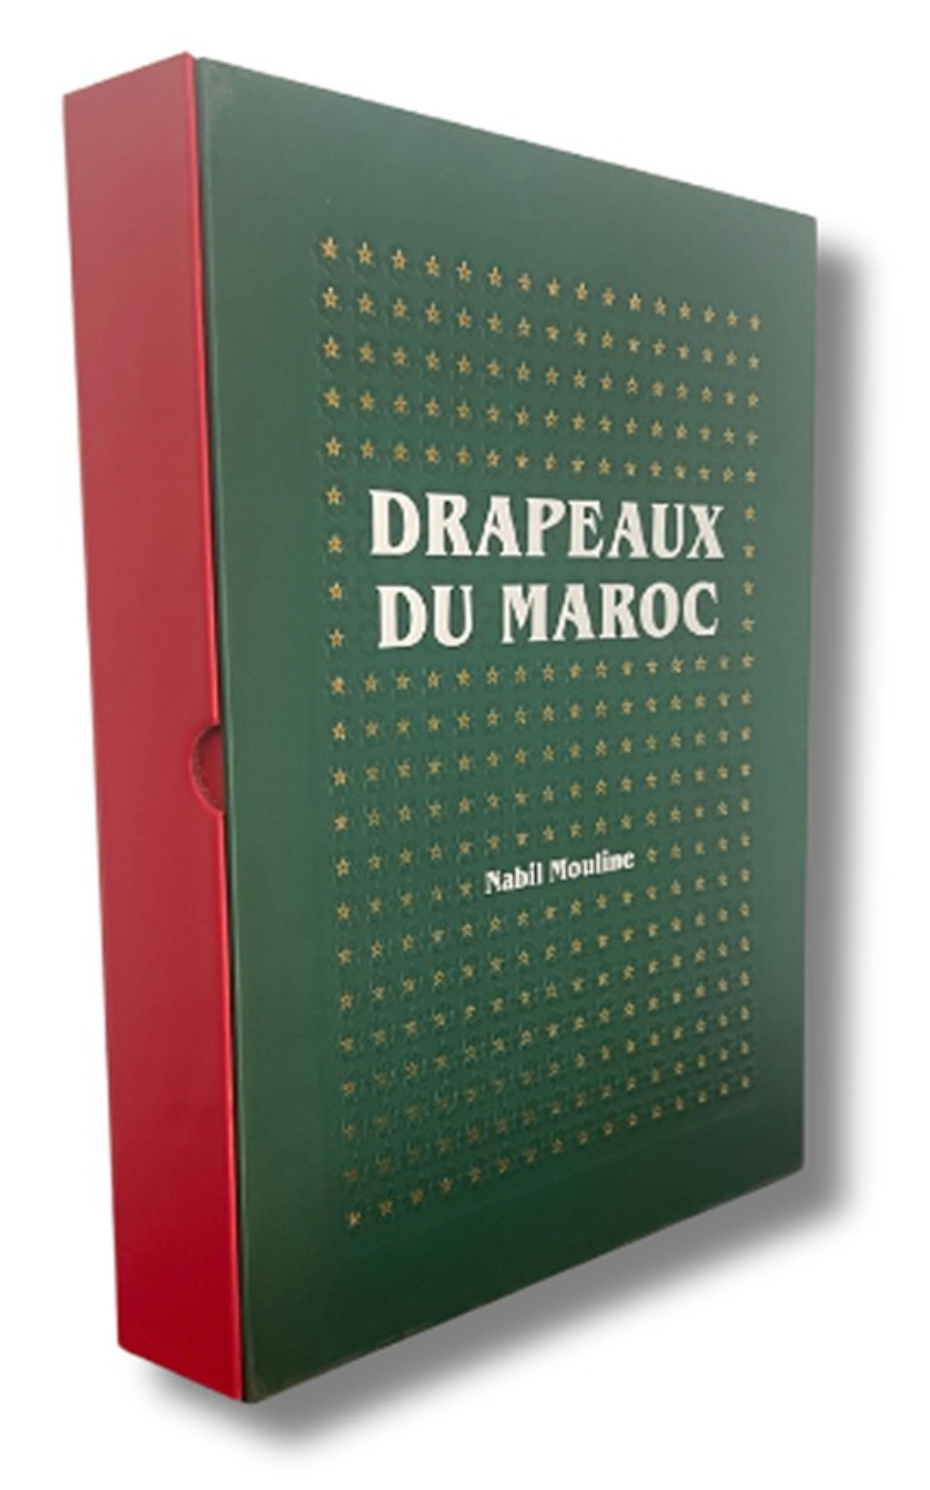 Flags of Morocco in box, one version in Arabic and one version in French